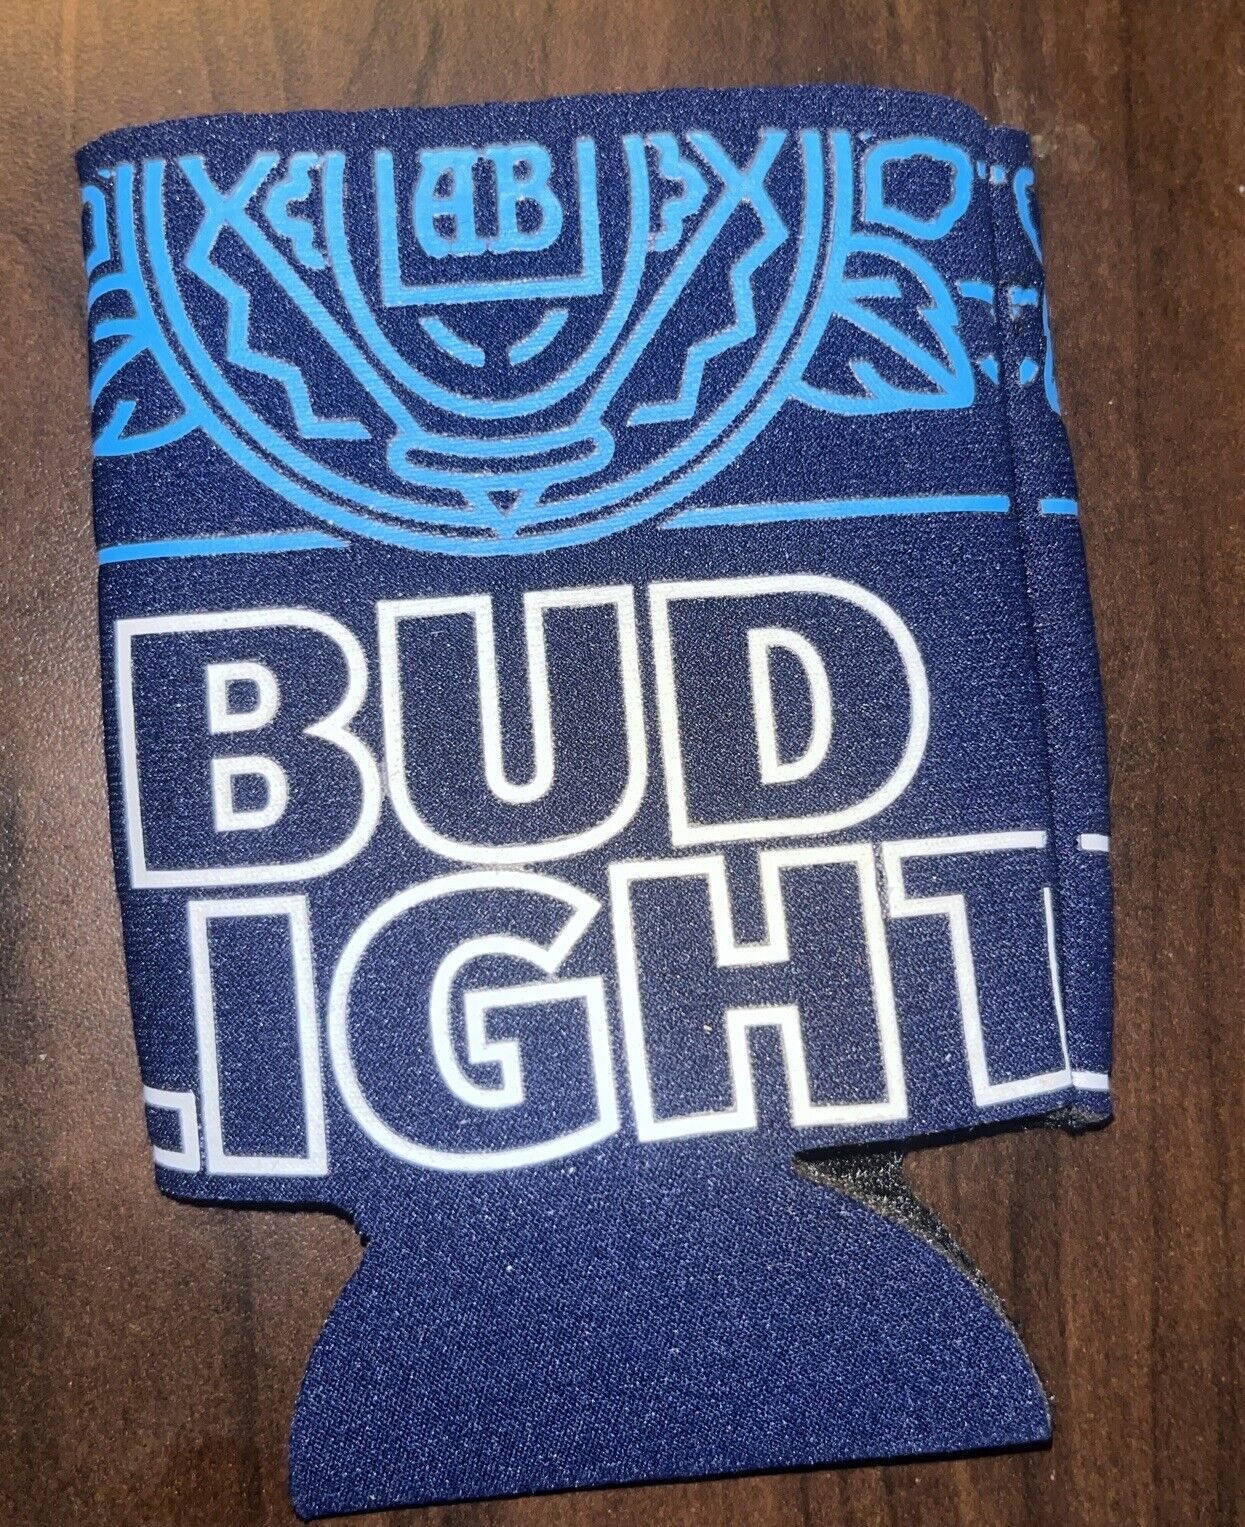 Bud Light  Beer Can coozie koozy coozy NEW Blue